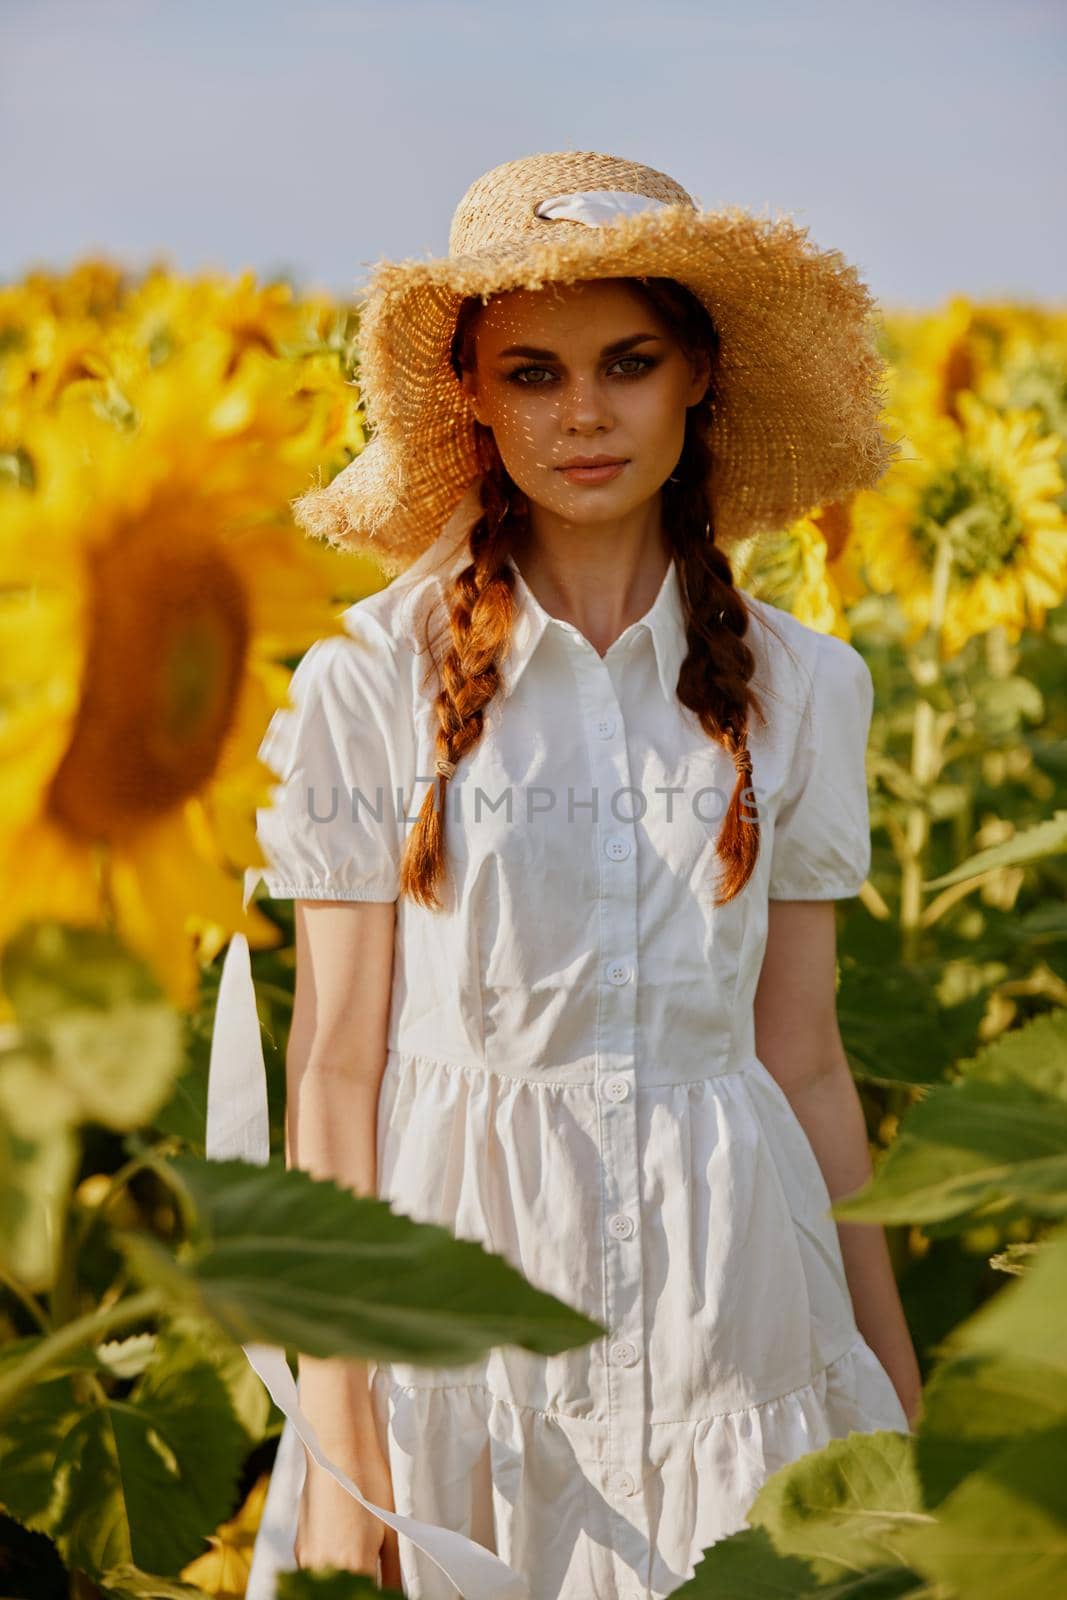 woman with pigtails in a hat on a field of sunflowers Summer time by SHOTPRIME